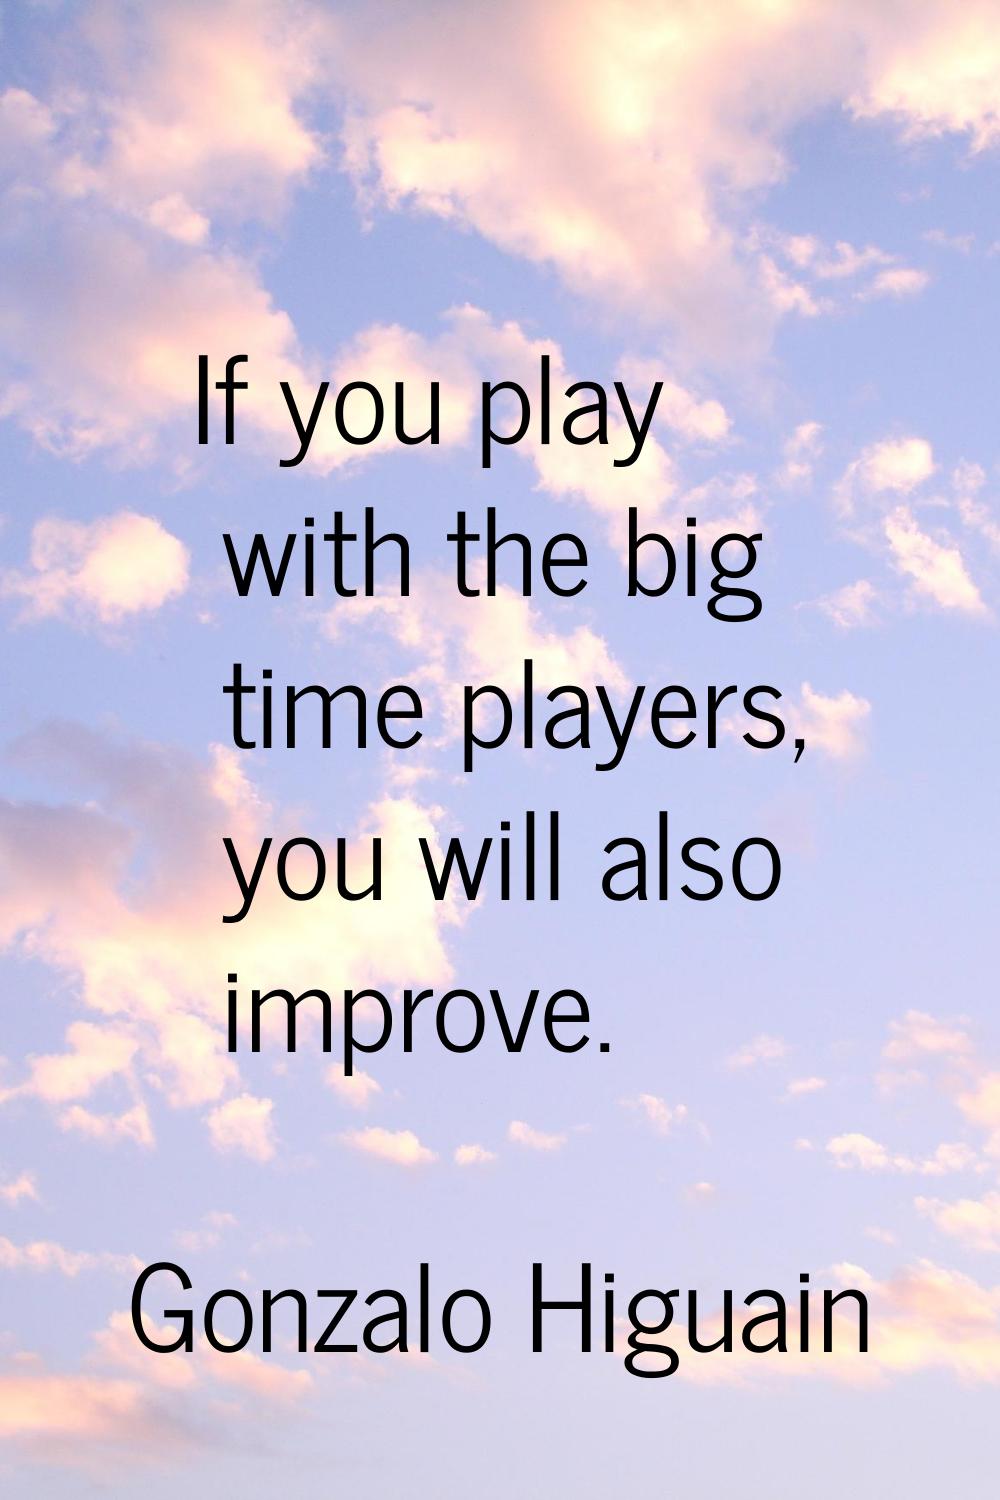 If you play with the big time players, you will also improve.